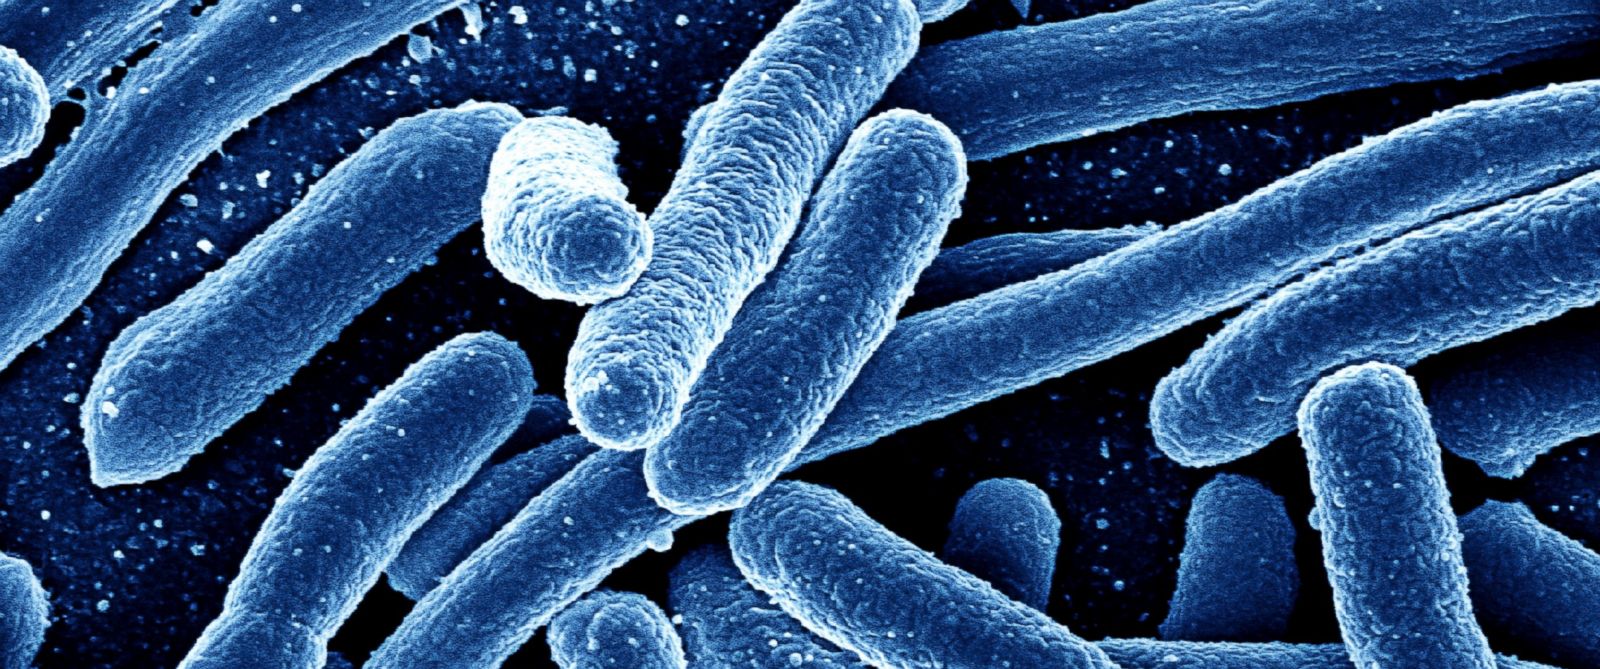 Mysterious compound called “F19” discovered by Israeli researchers to kill antibiotic-resistant superbugs without encouraging resistance